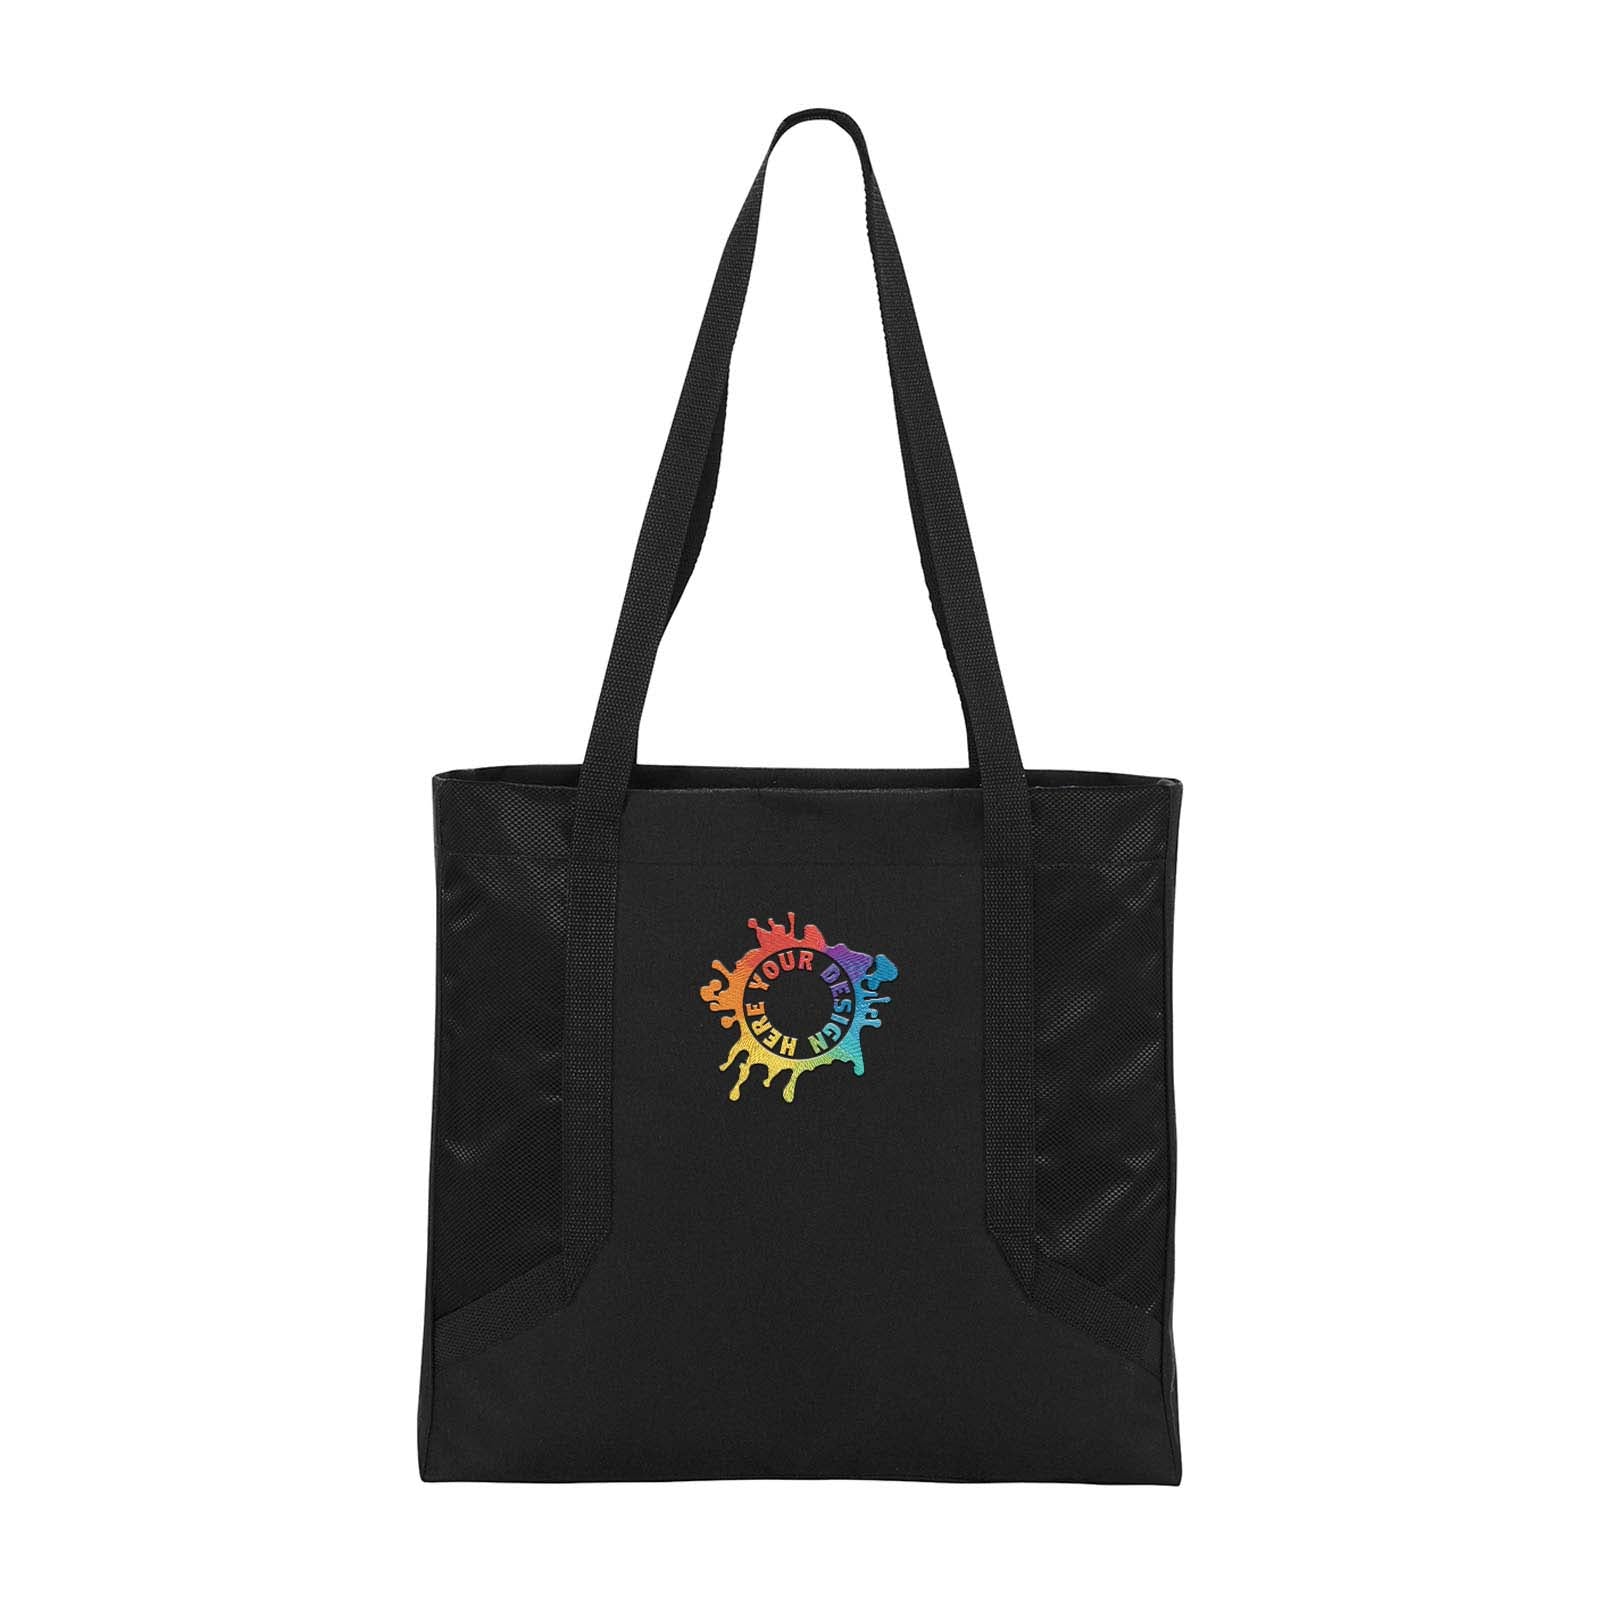 Port Authority ® Circuit Tote Embroidery - Mato & Hash